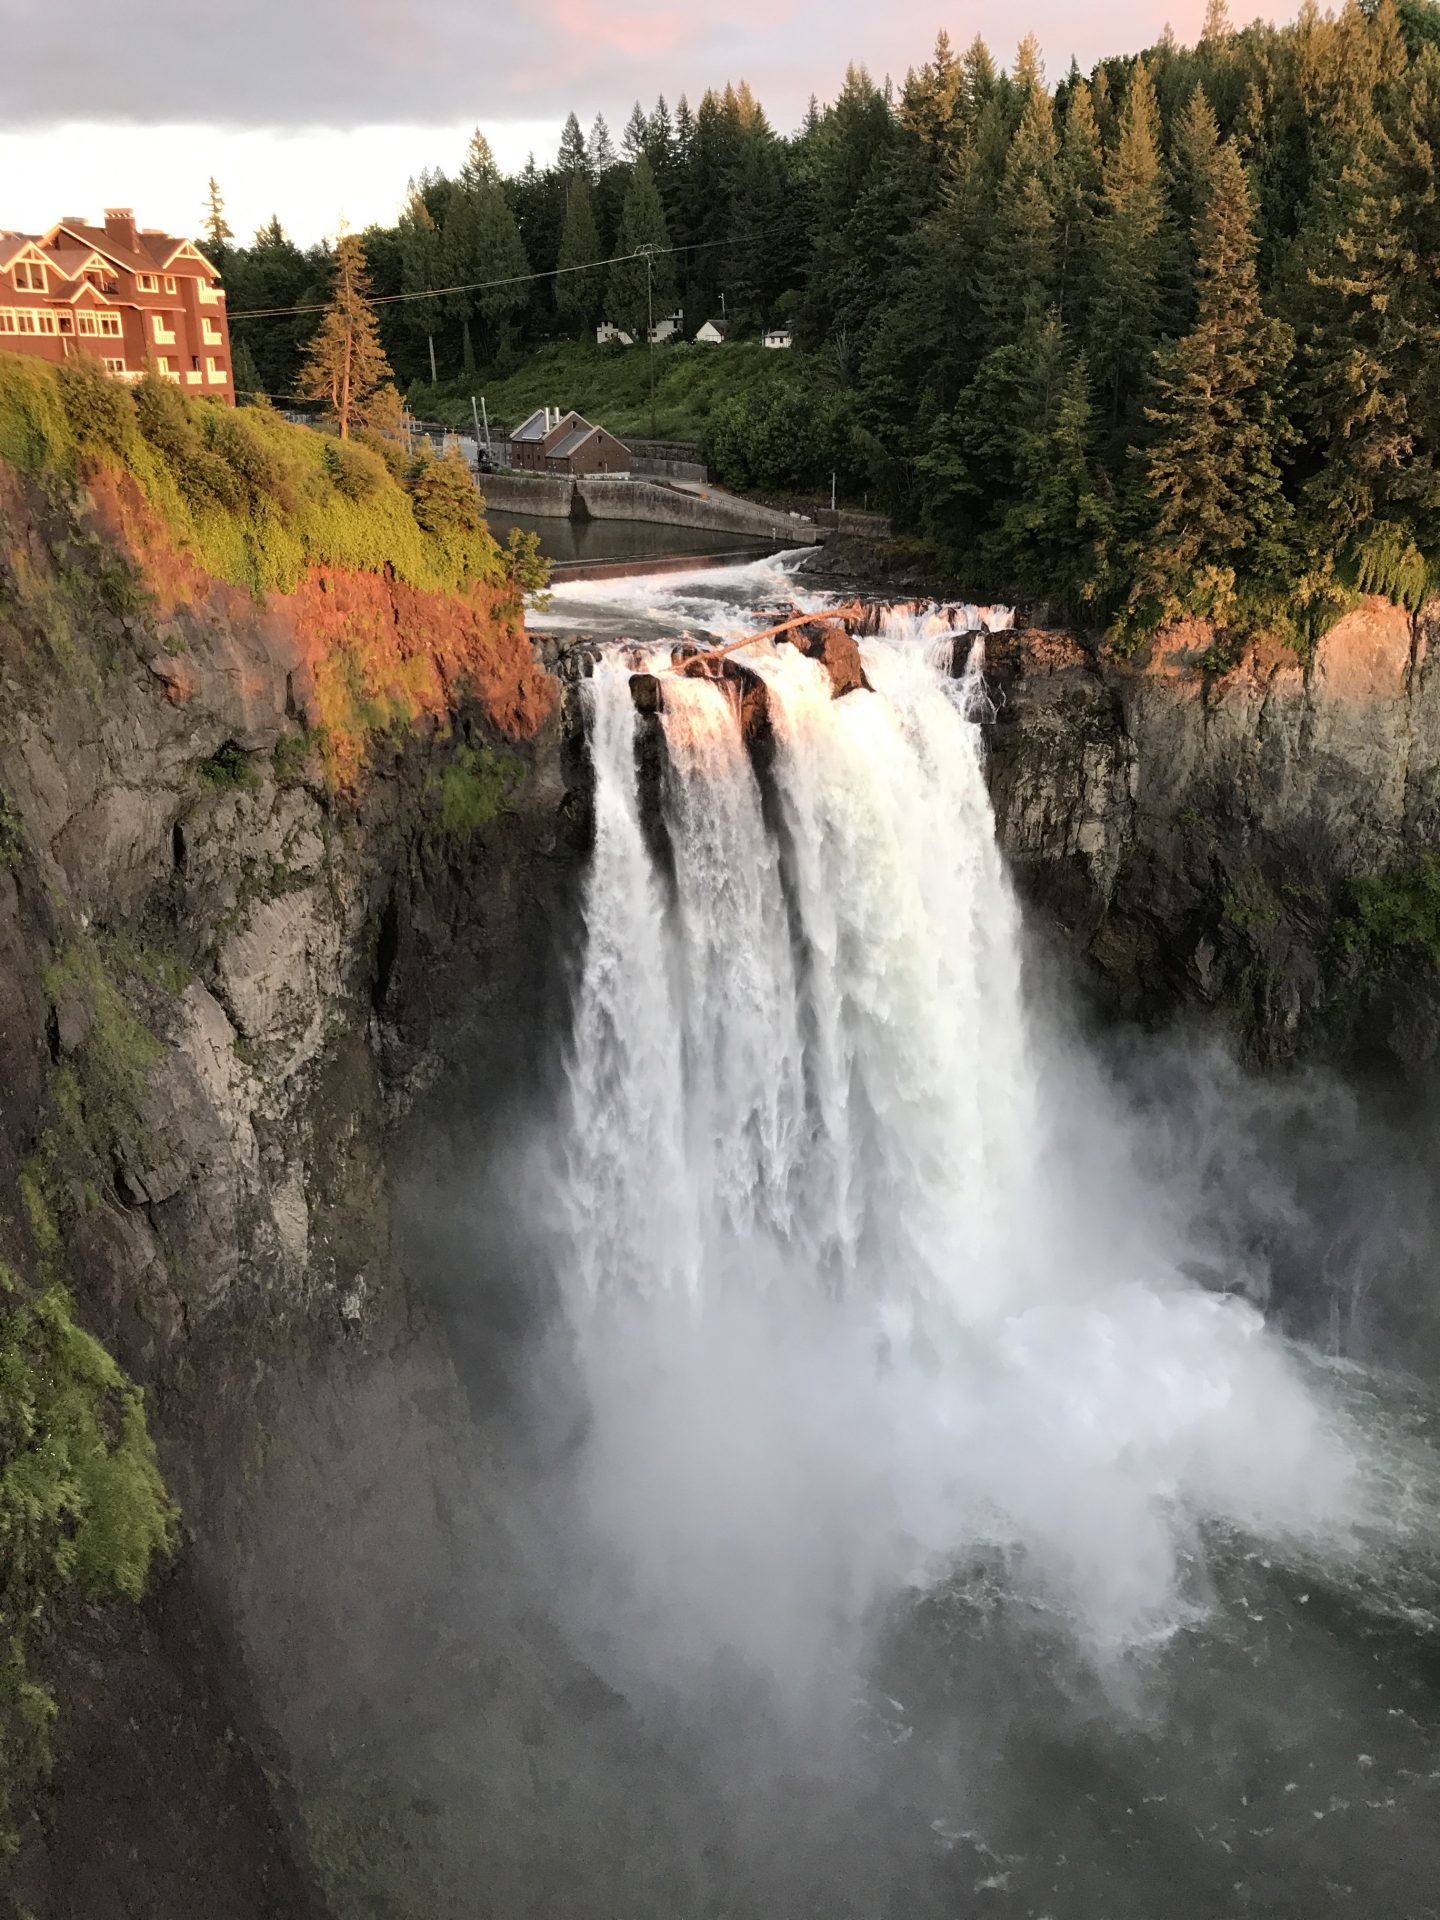 Snoqualmie Falls at sunset